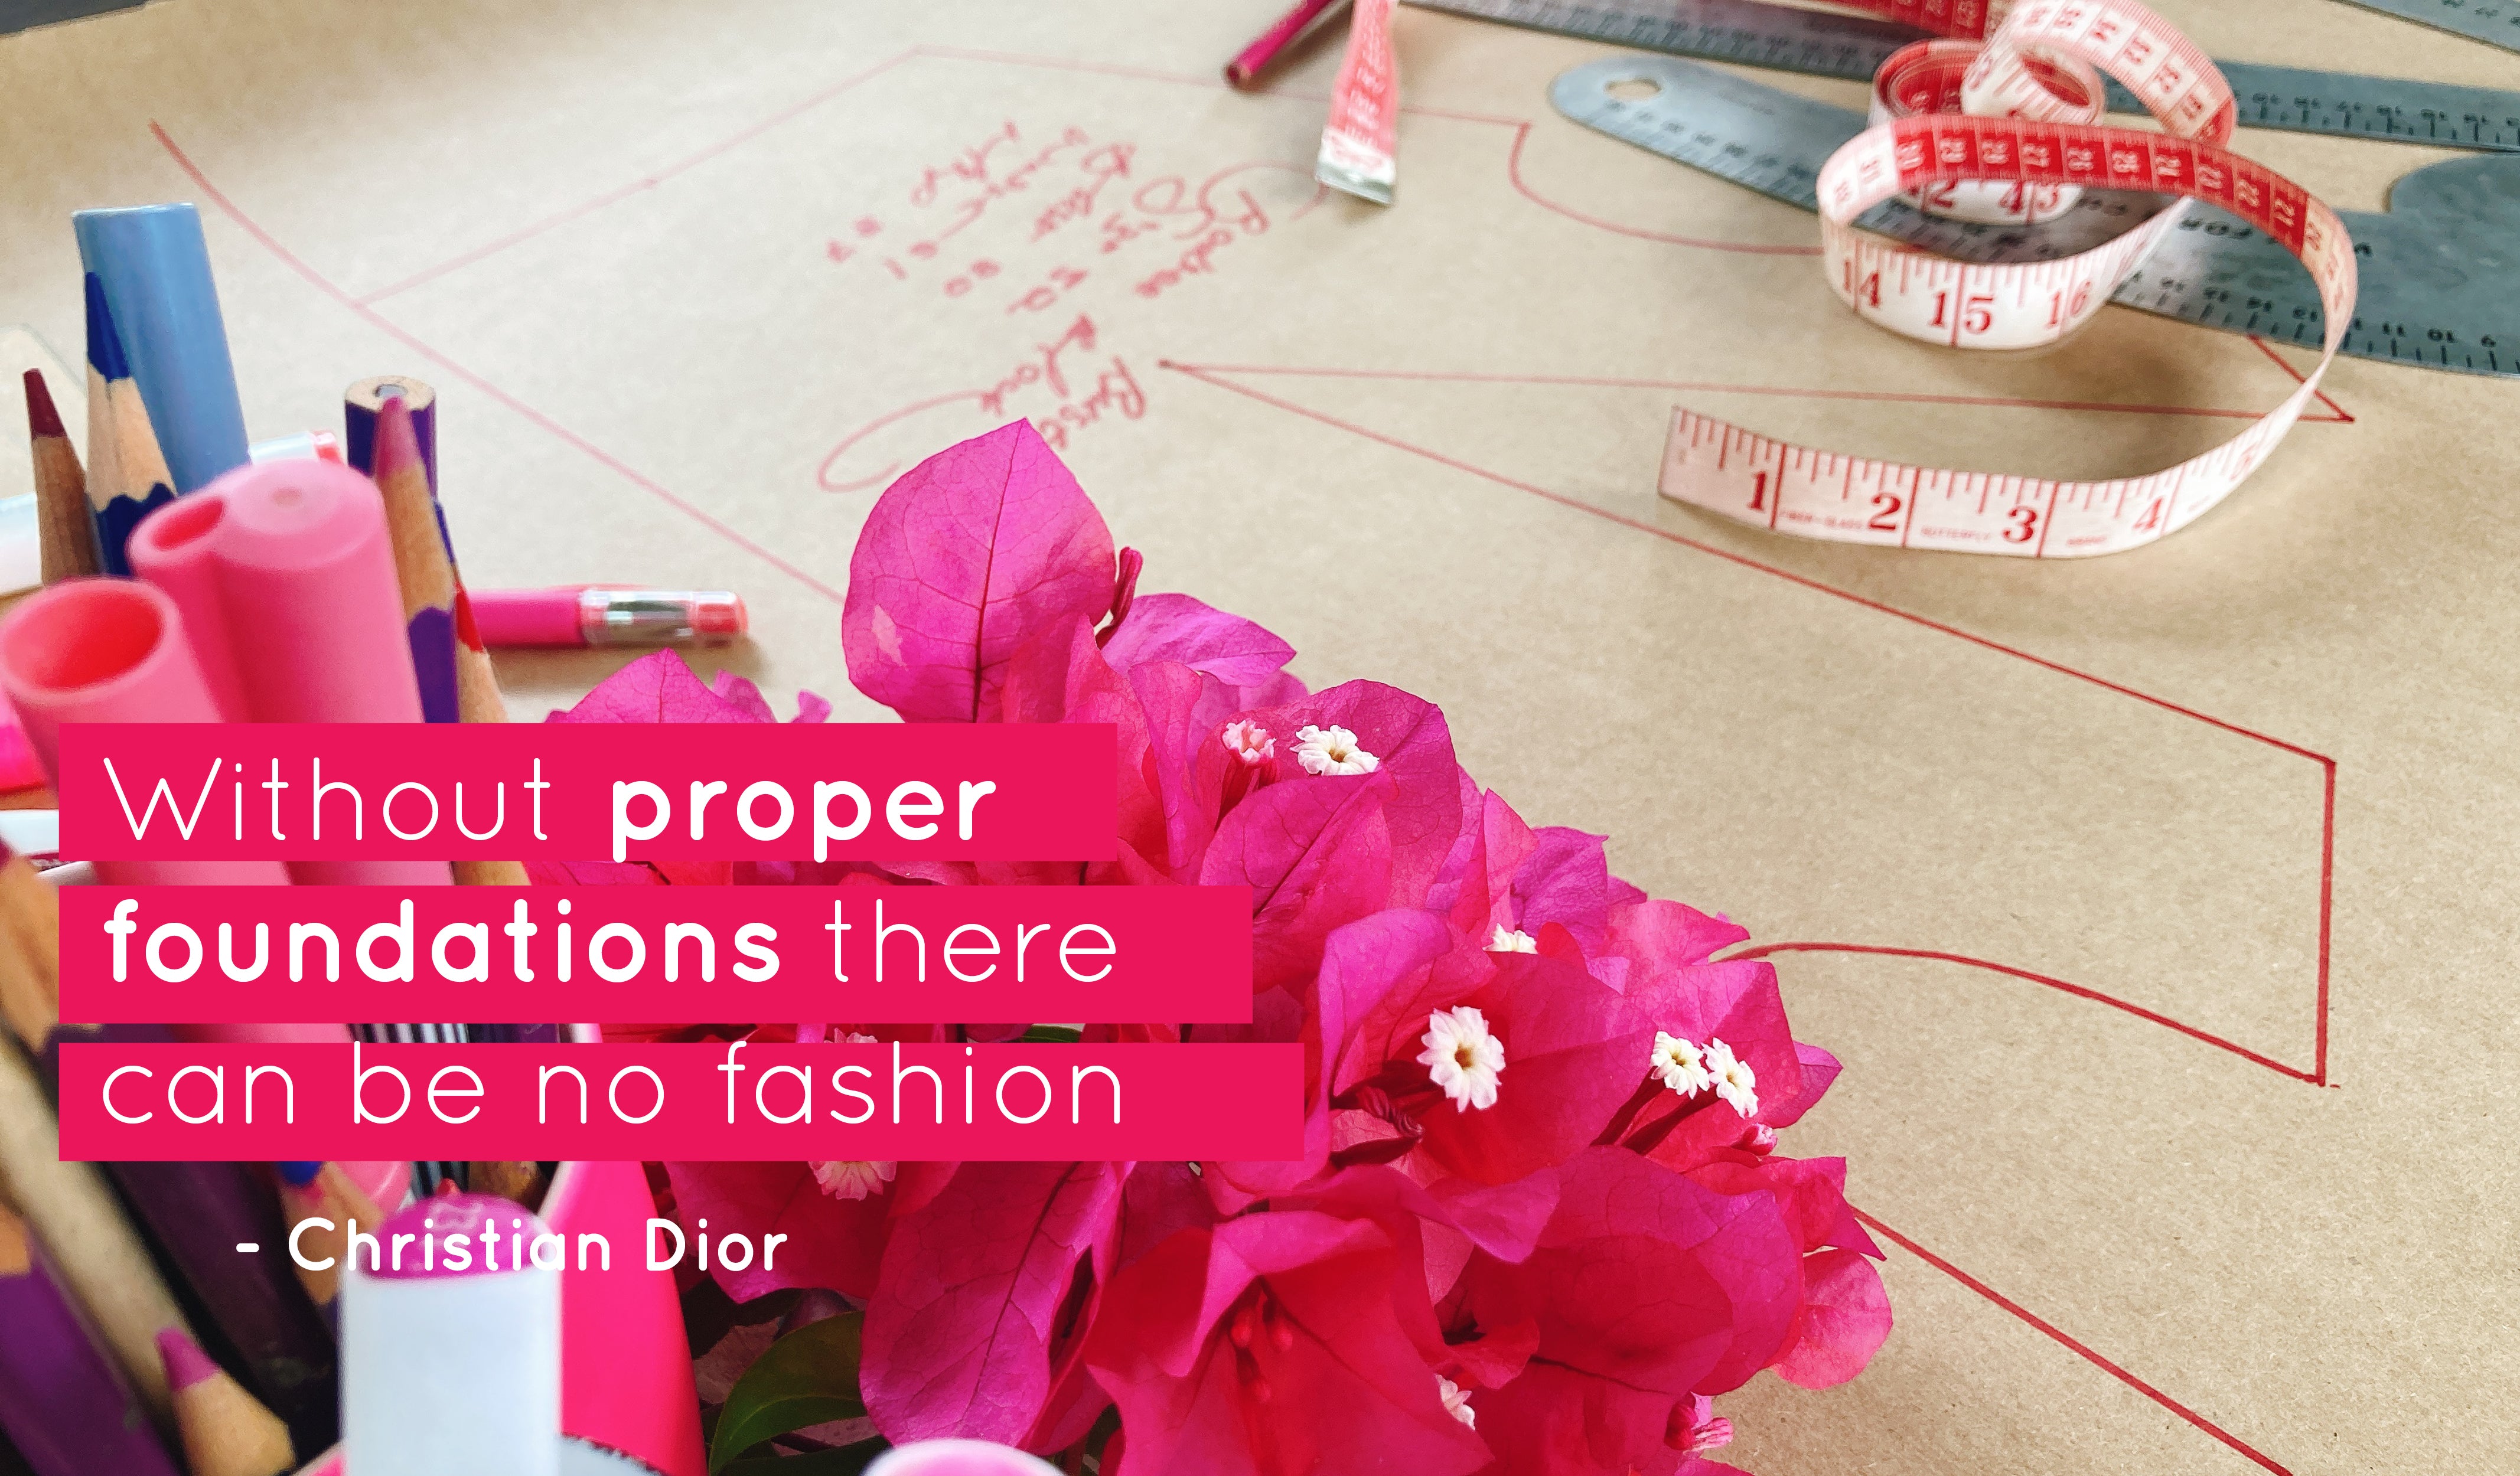 Learn pattern drafting at Milner Fashion House with Carina